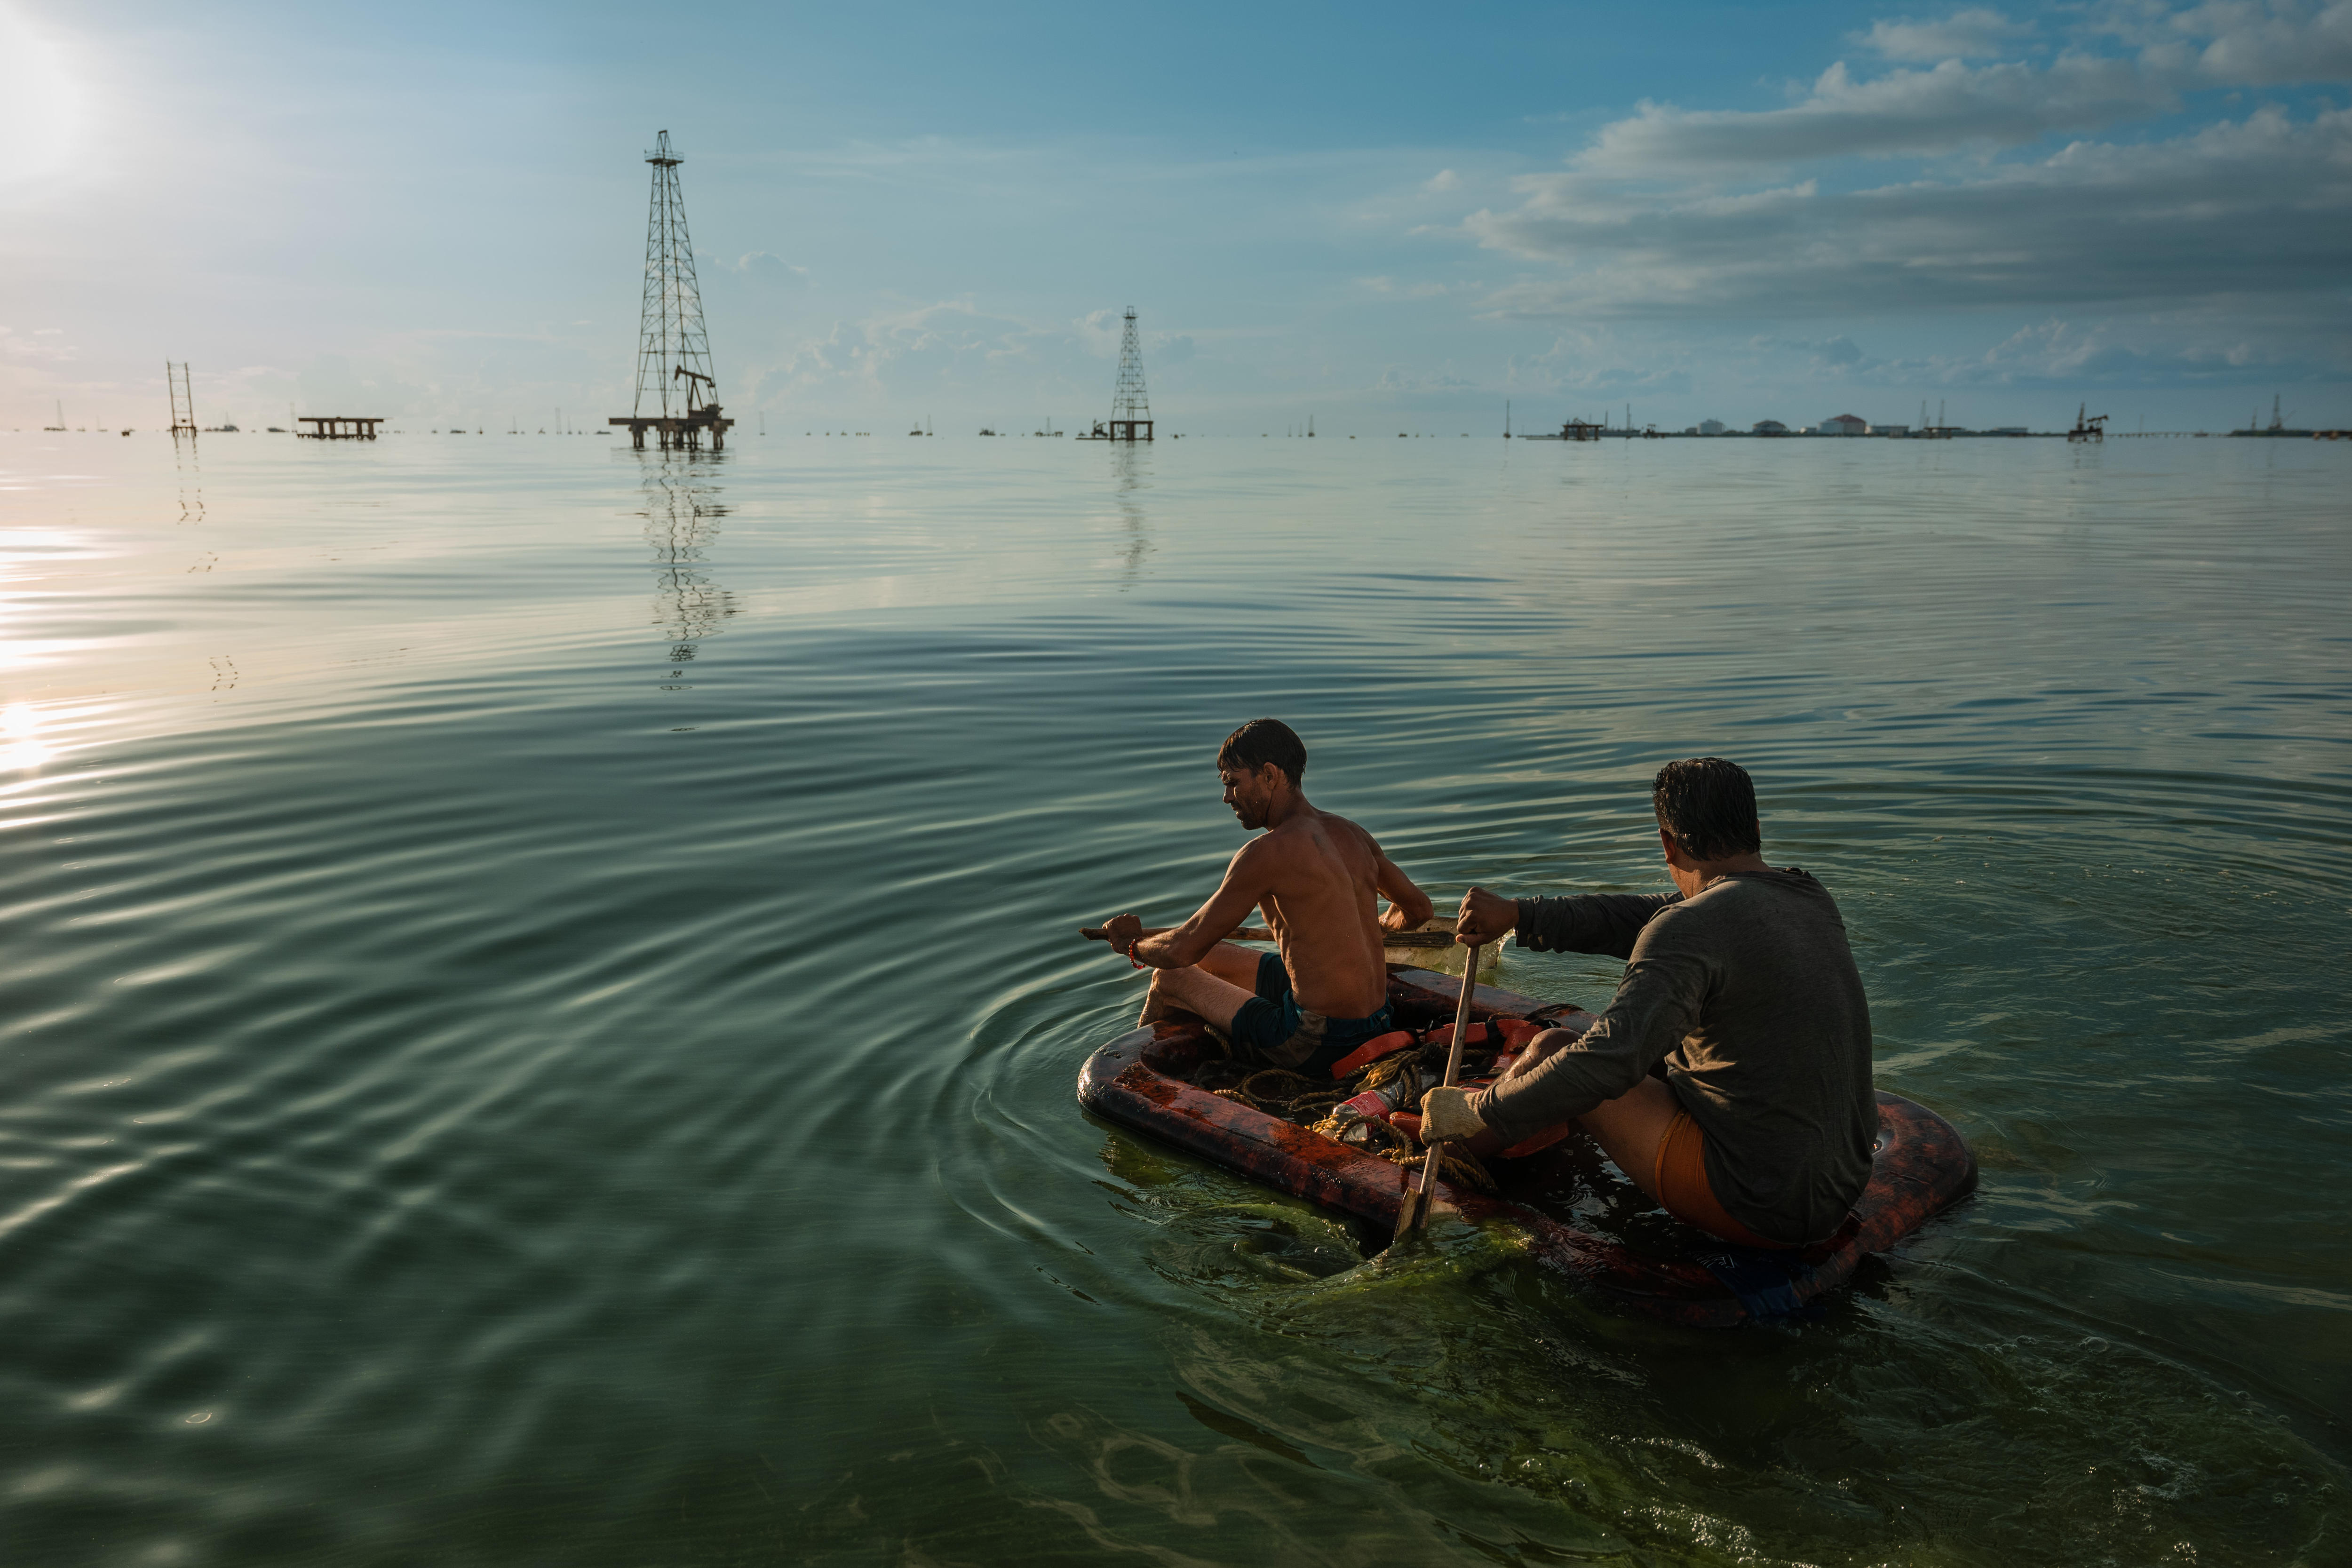 Two fishermen paddle through the green waters of Lake Maracaibo